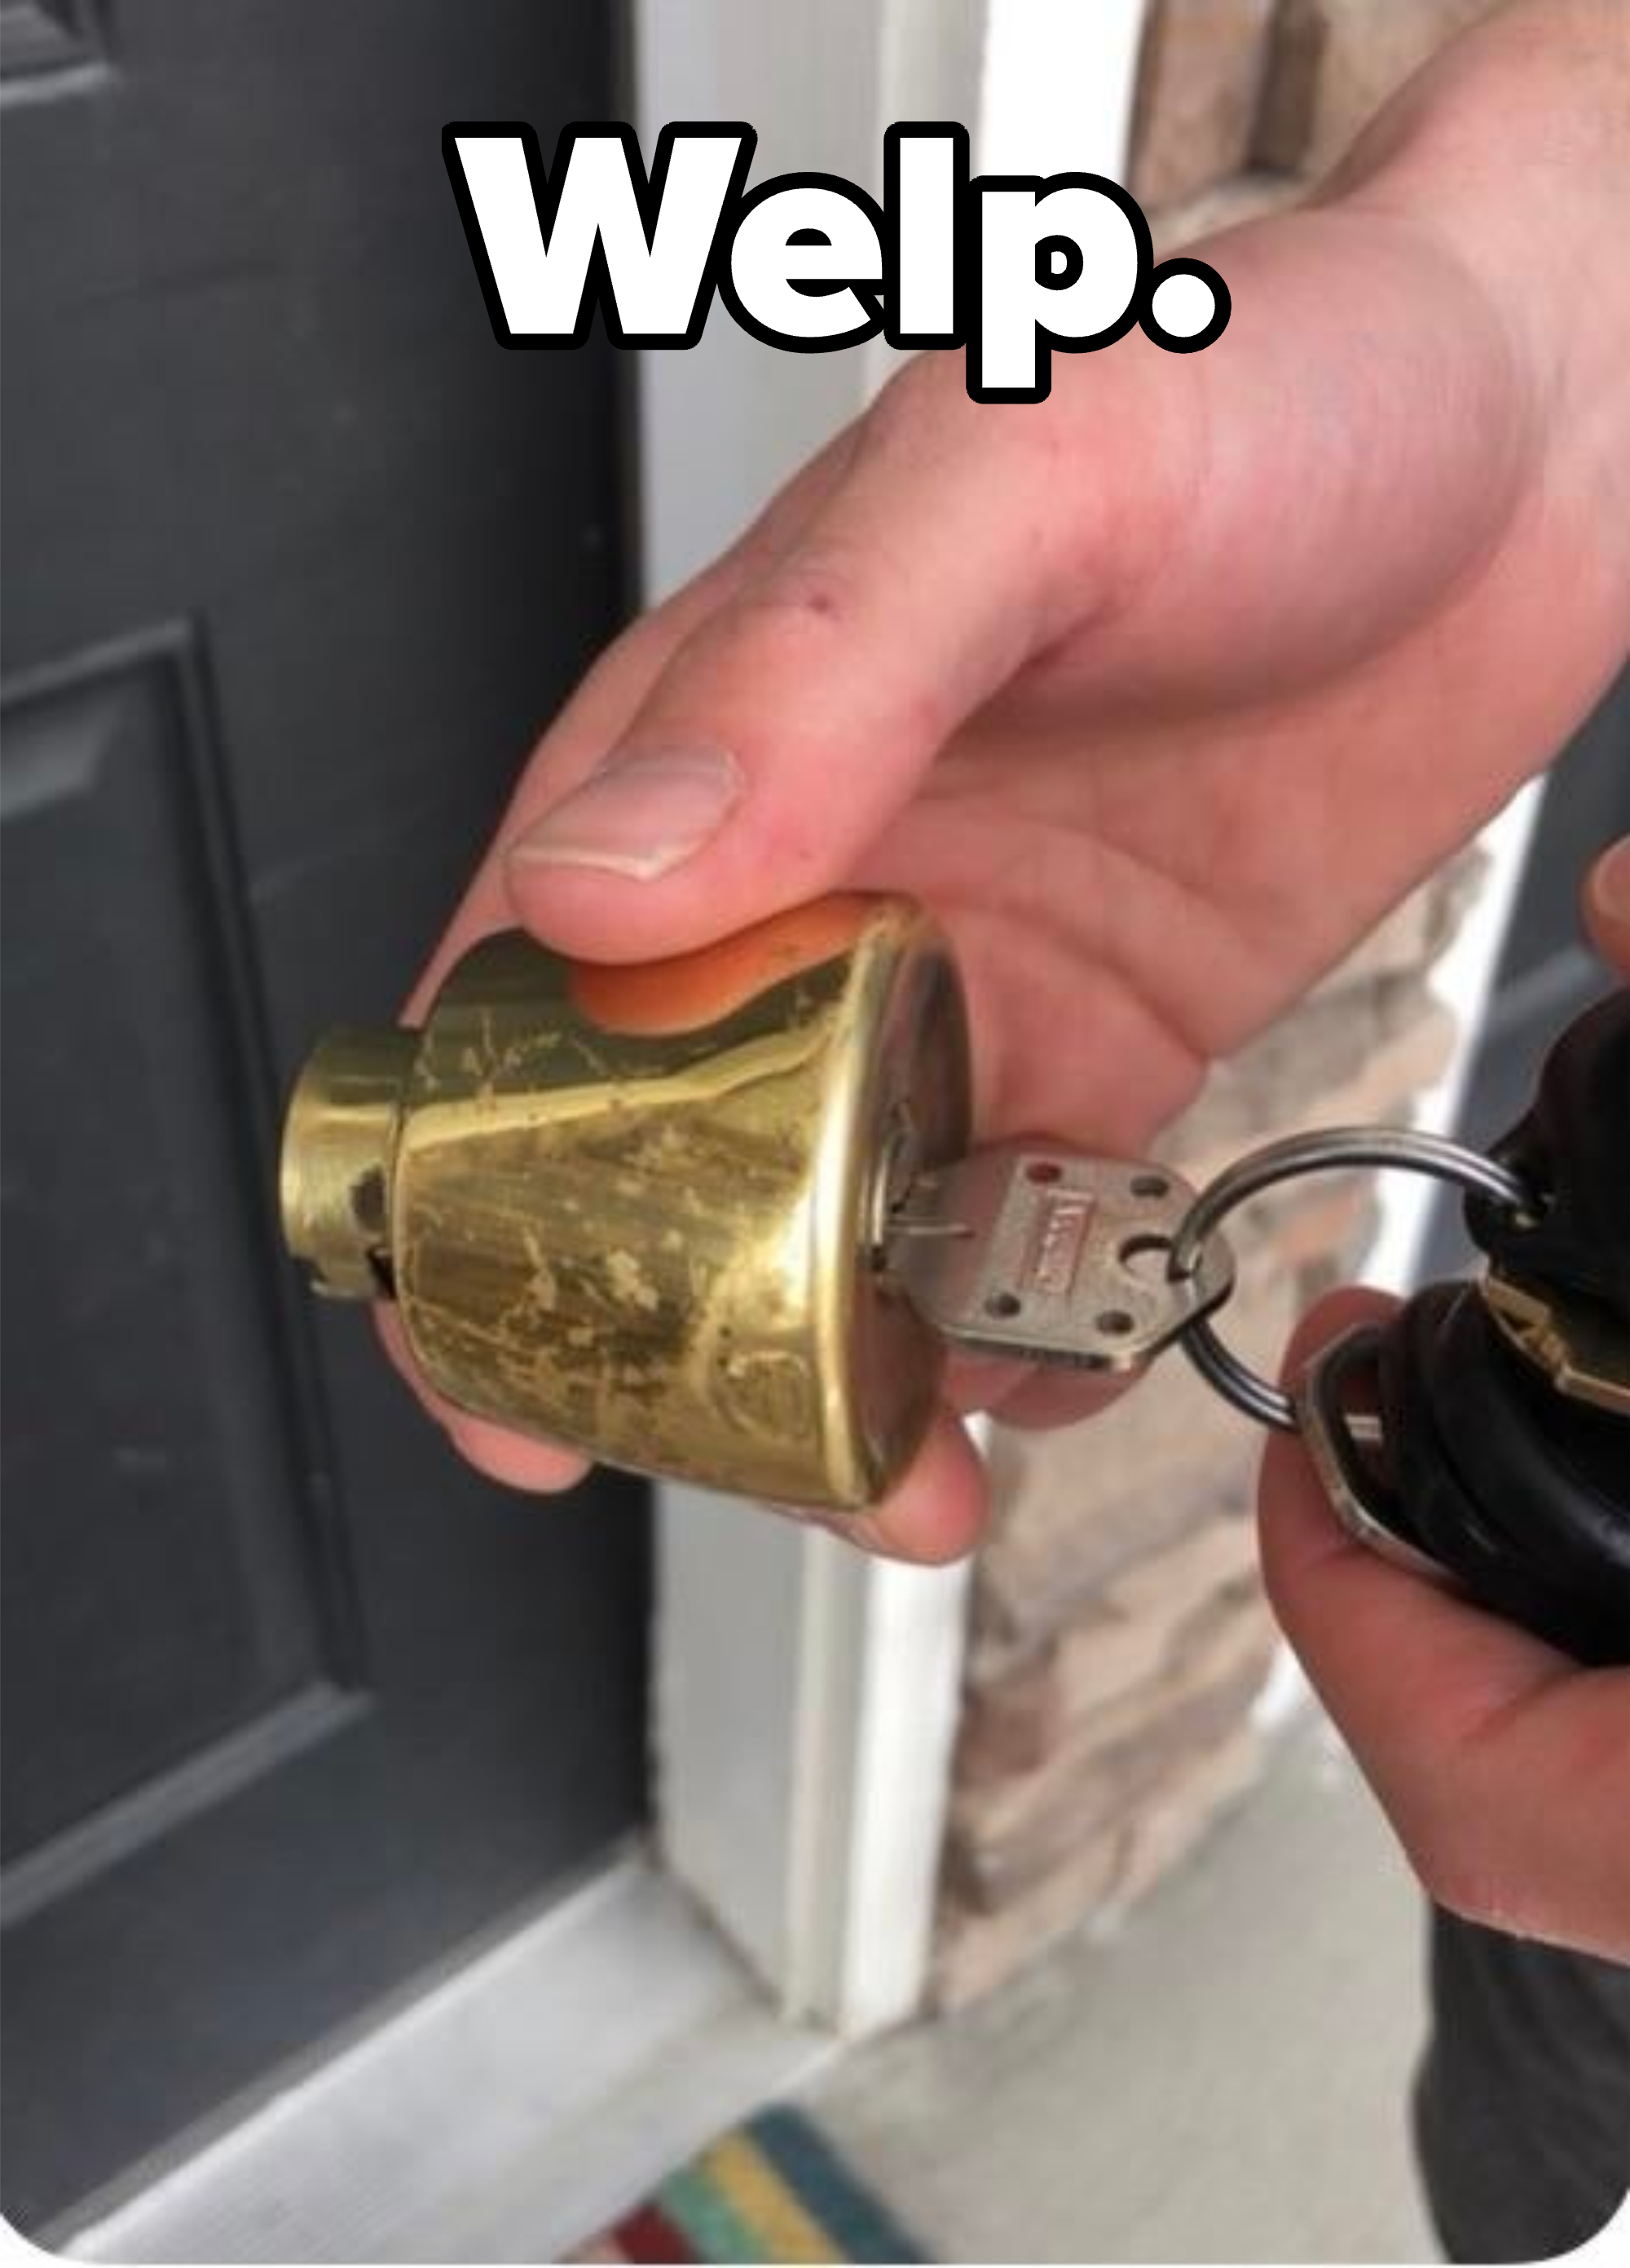 Hand holding a brass door knob and keys, with a door in the background